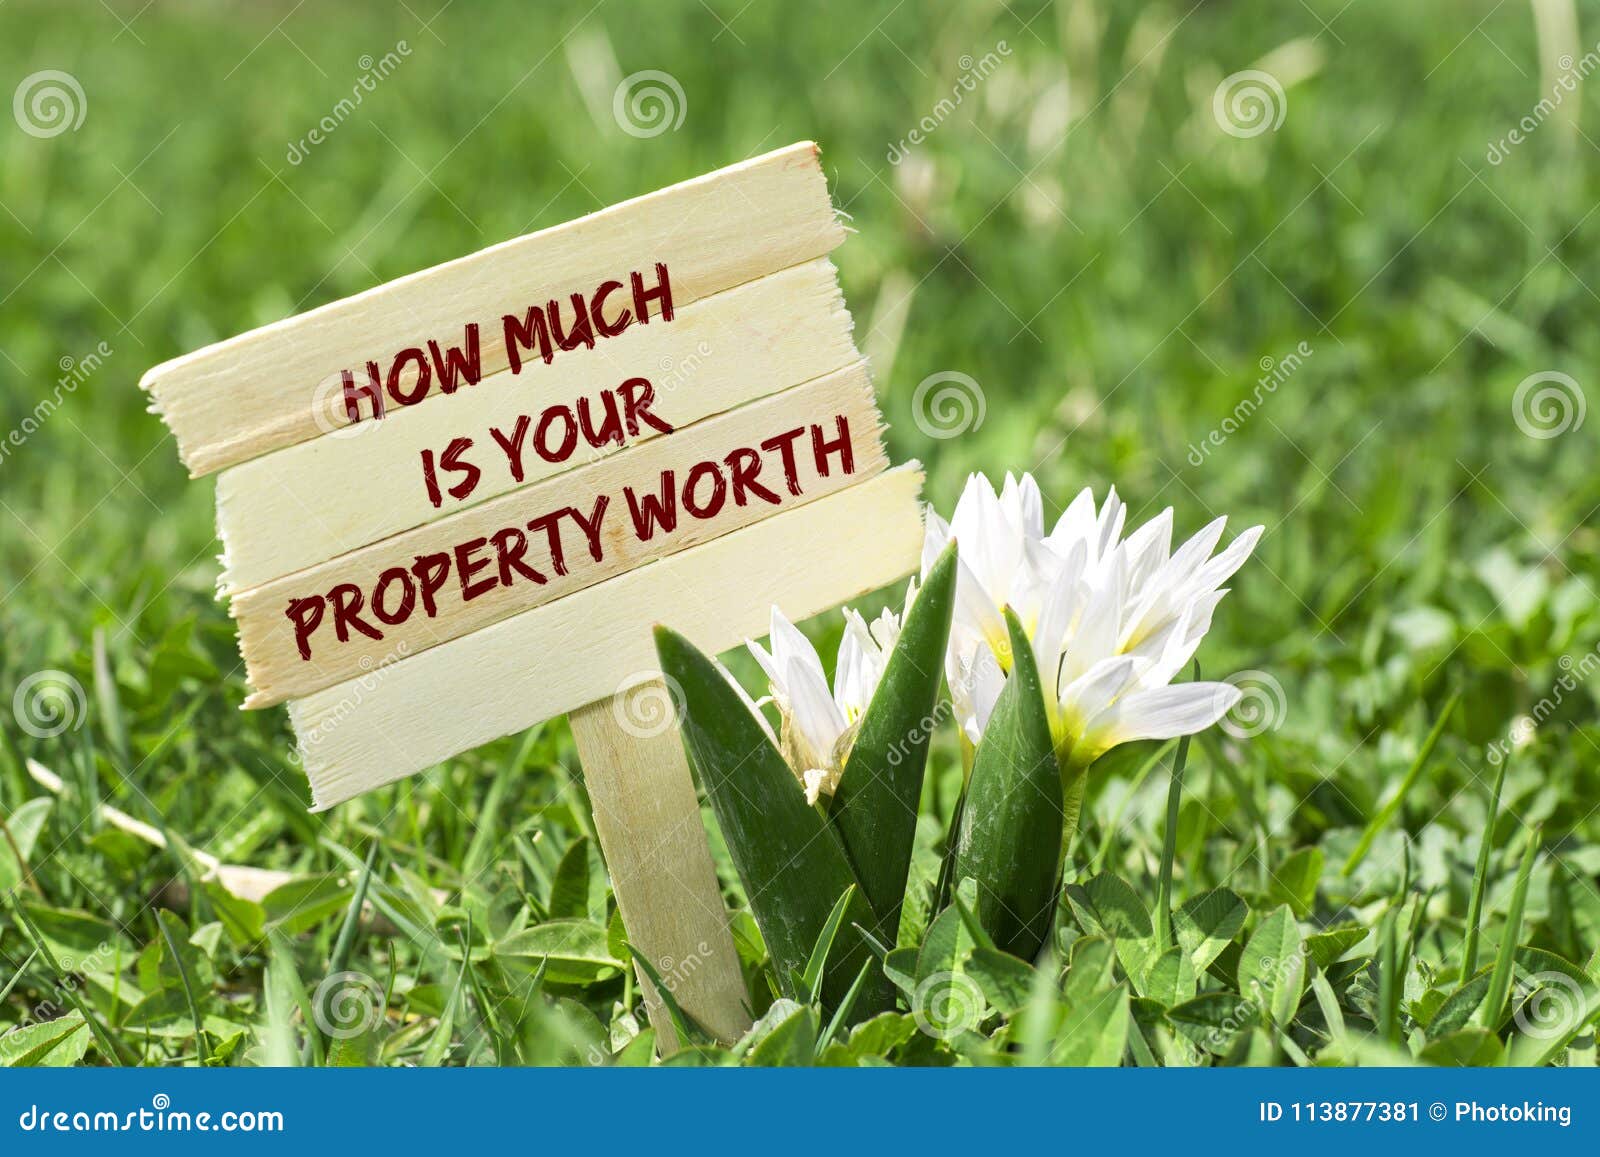 how much is your property worth